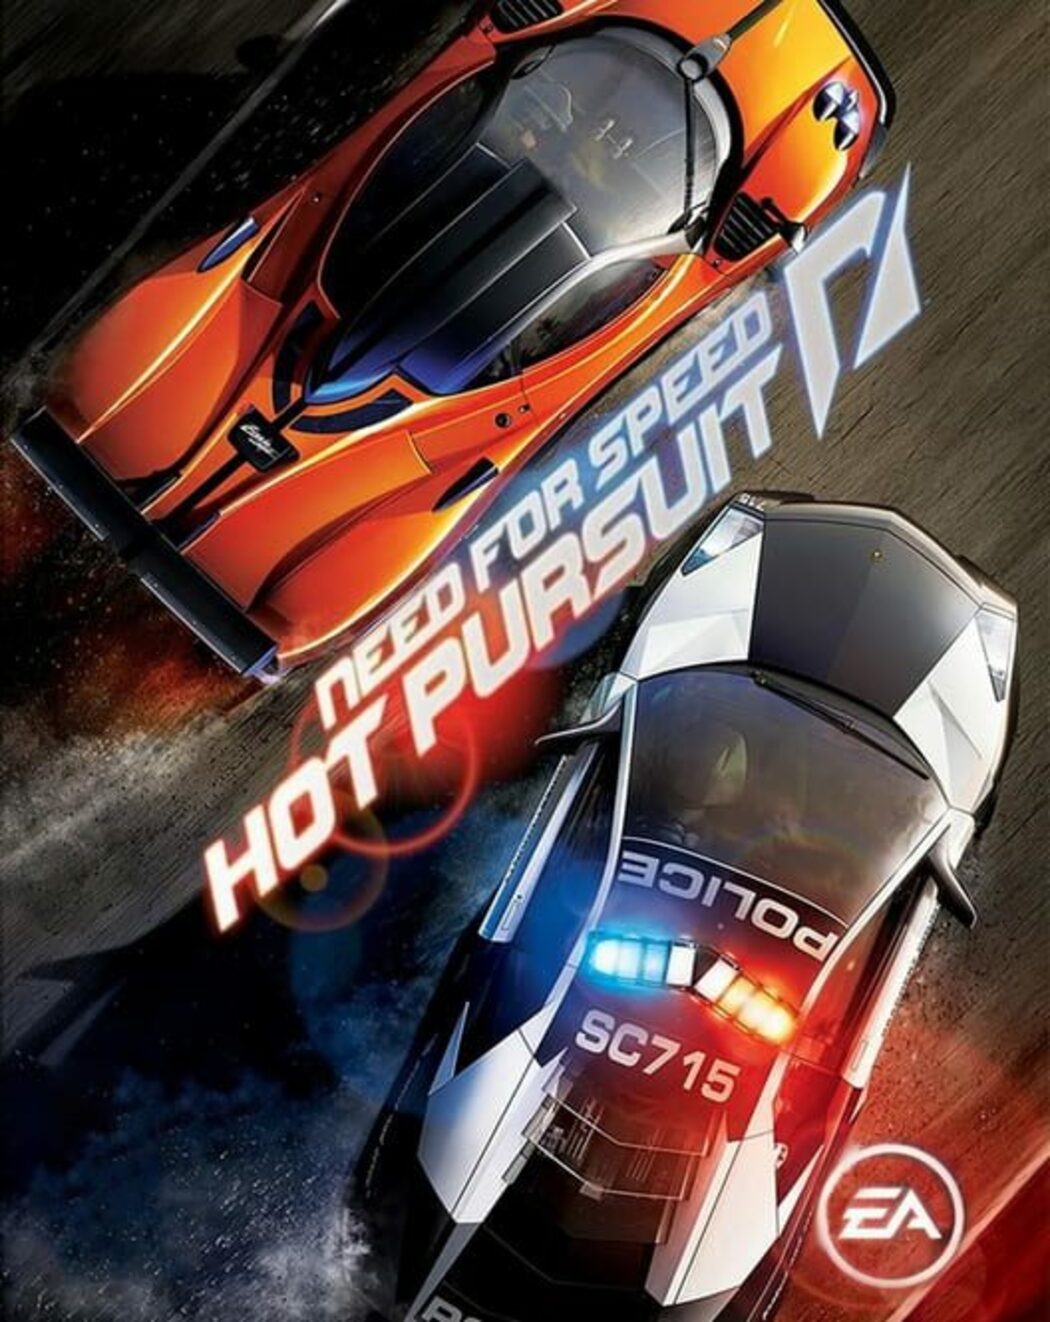 Buy Need for Speed: Hot Pursuit EA App